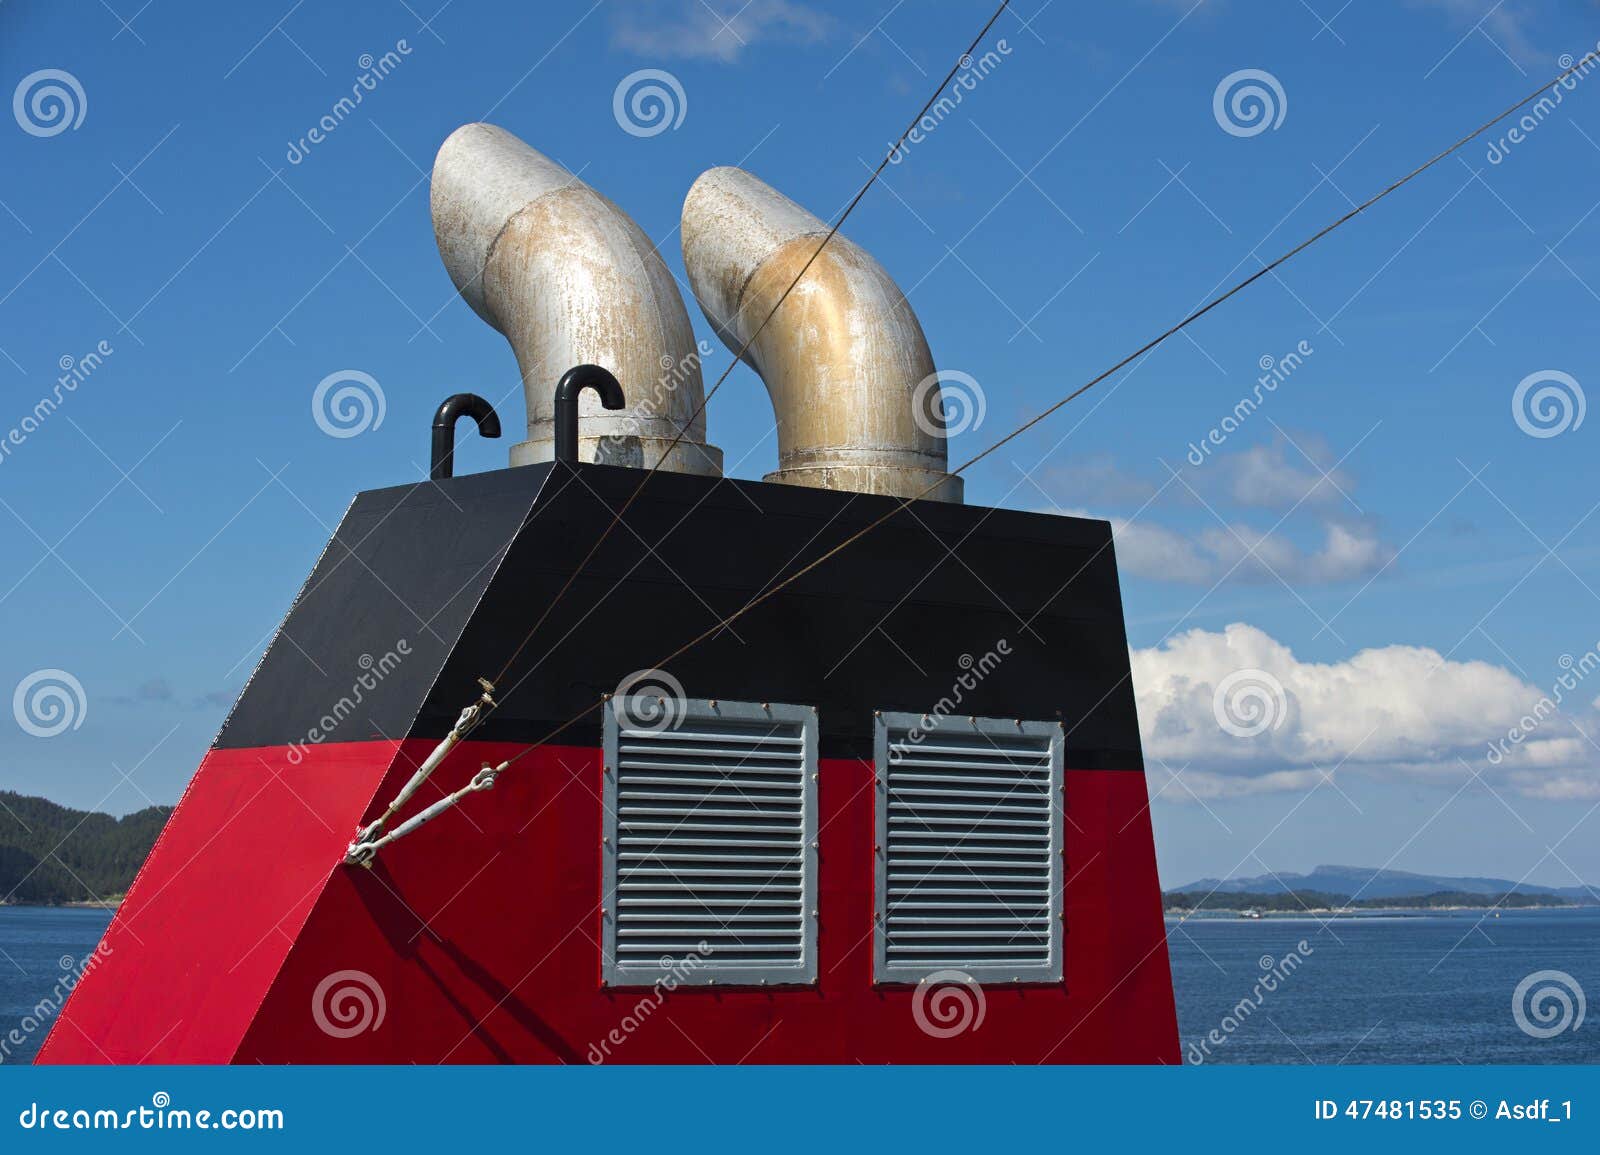 Exhaust pipes stock image. Image of emissions, machines - 47481535